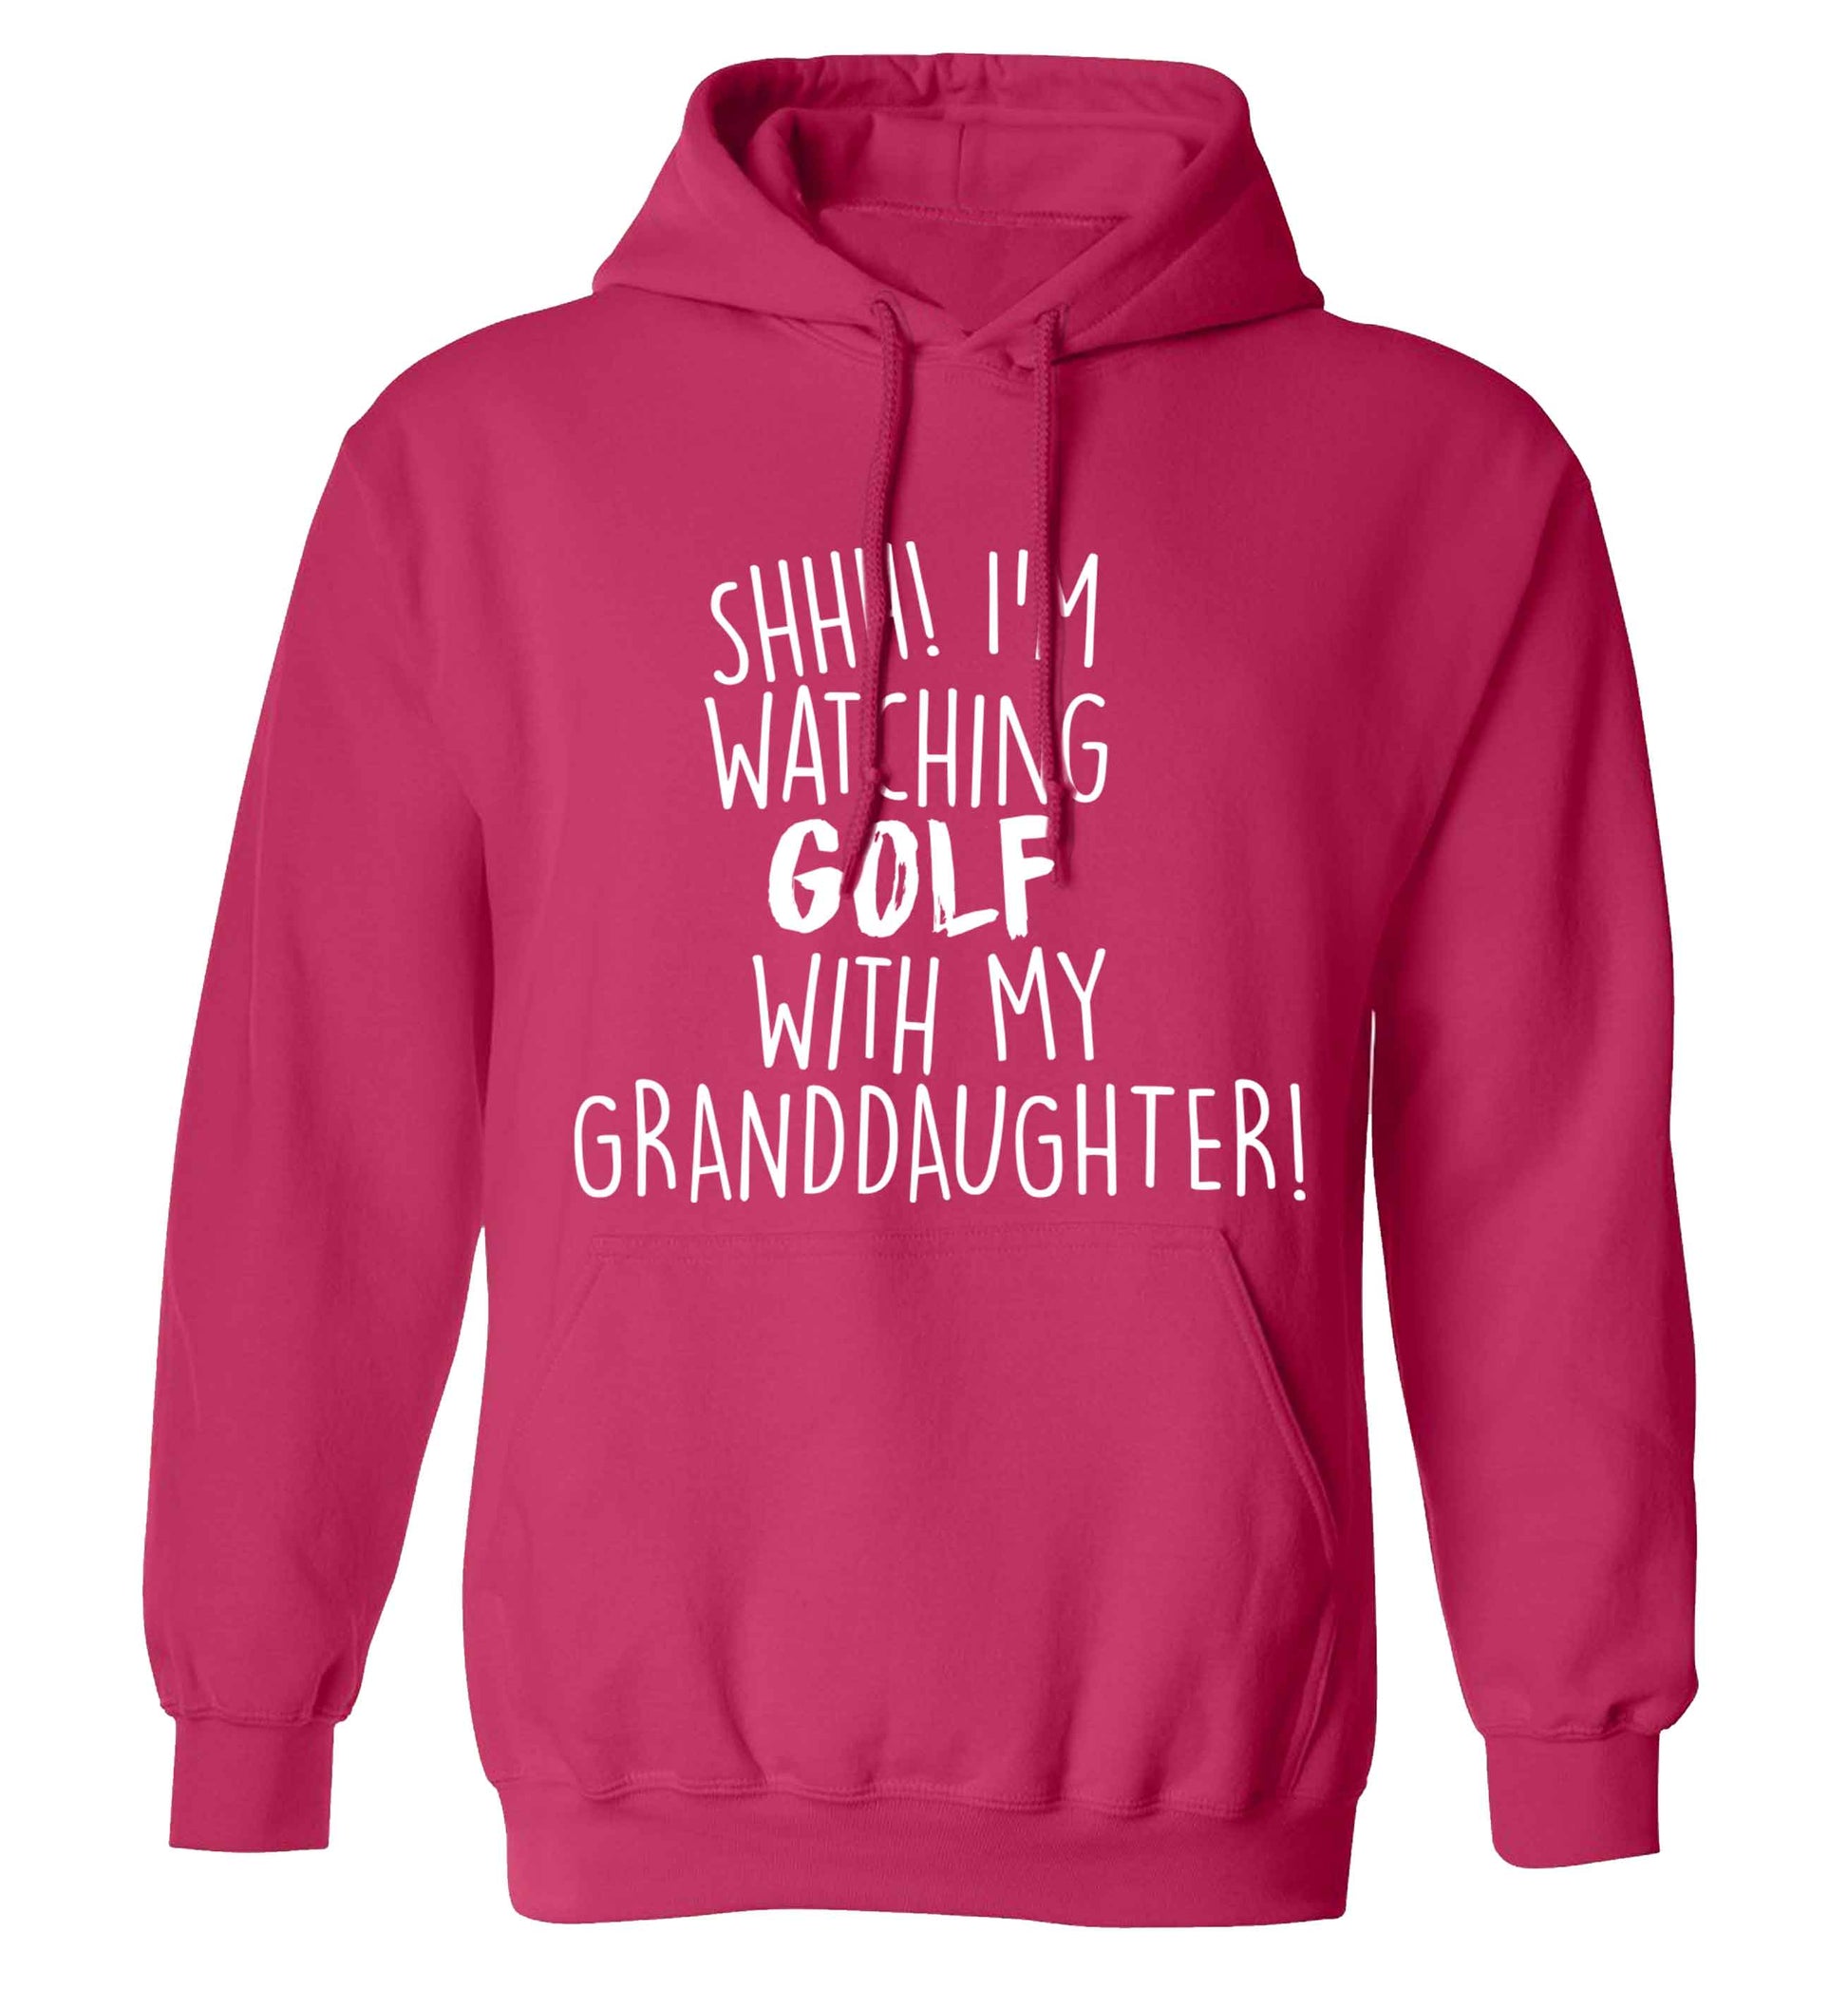 Shh I'm watching golf with my granddaughter adults unisex pink hoodie 2XL